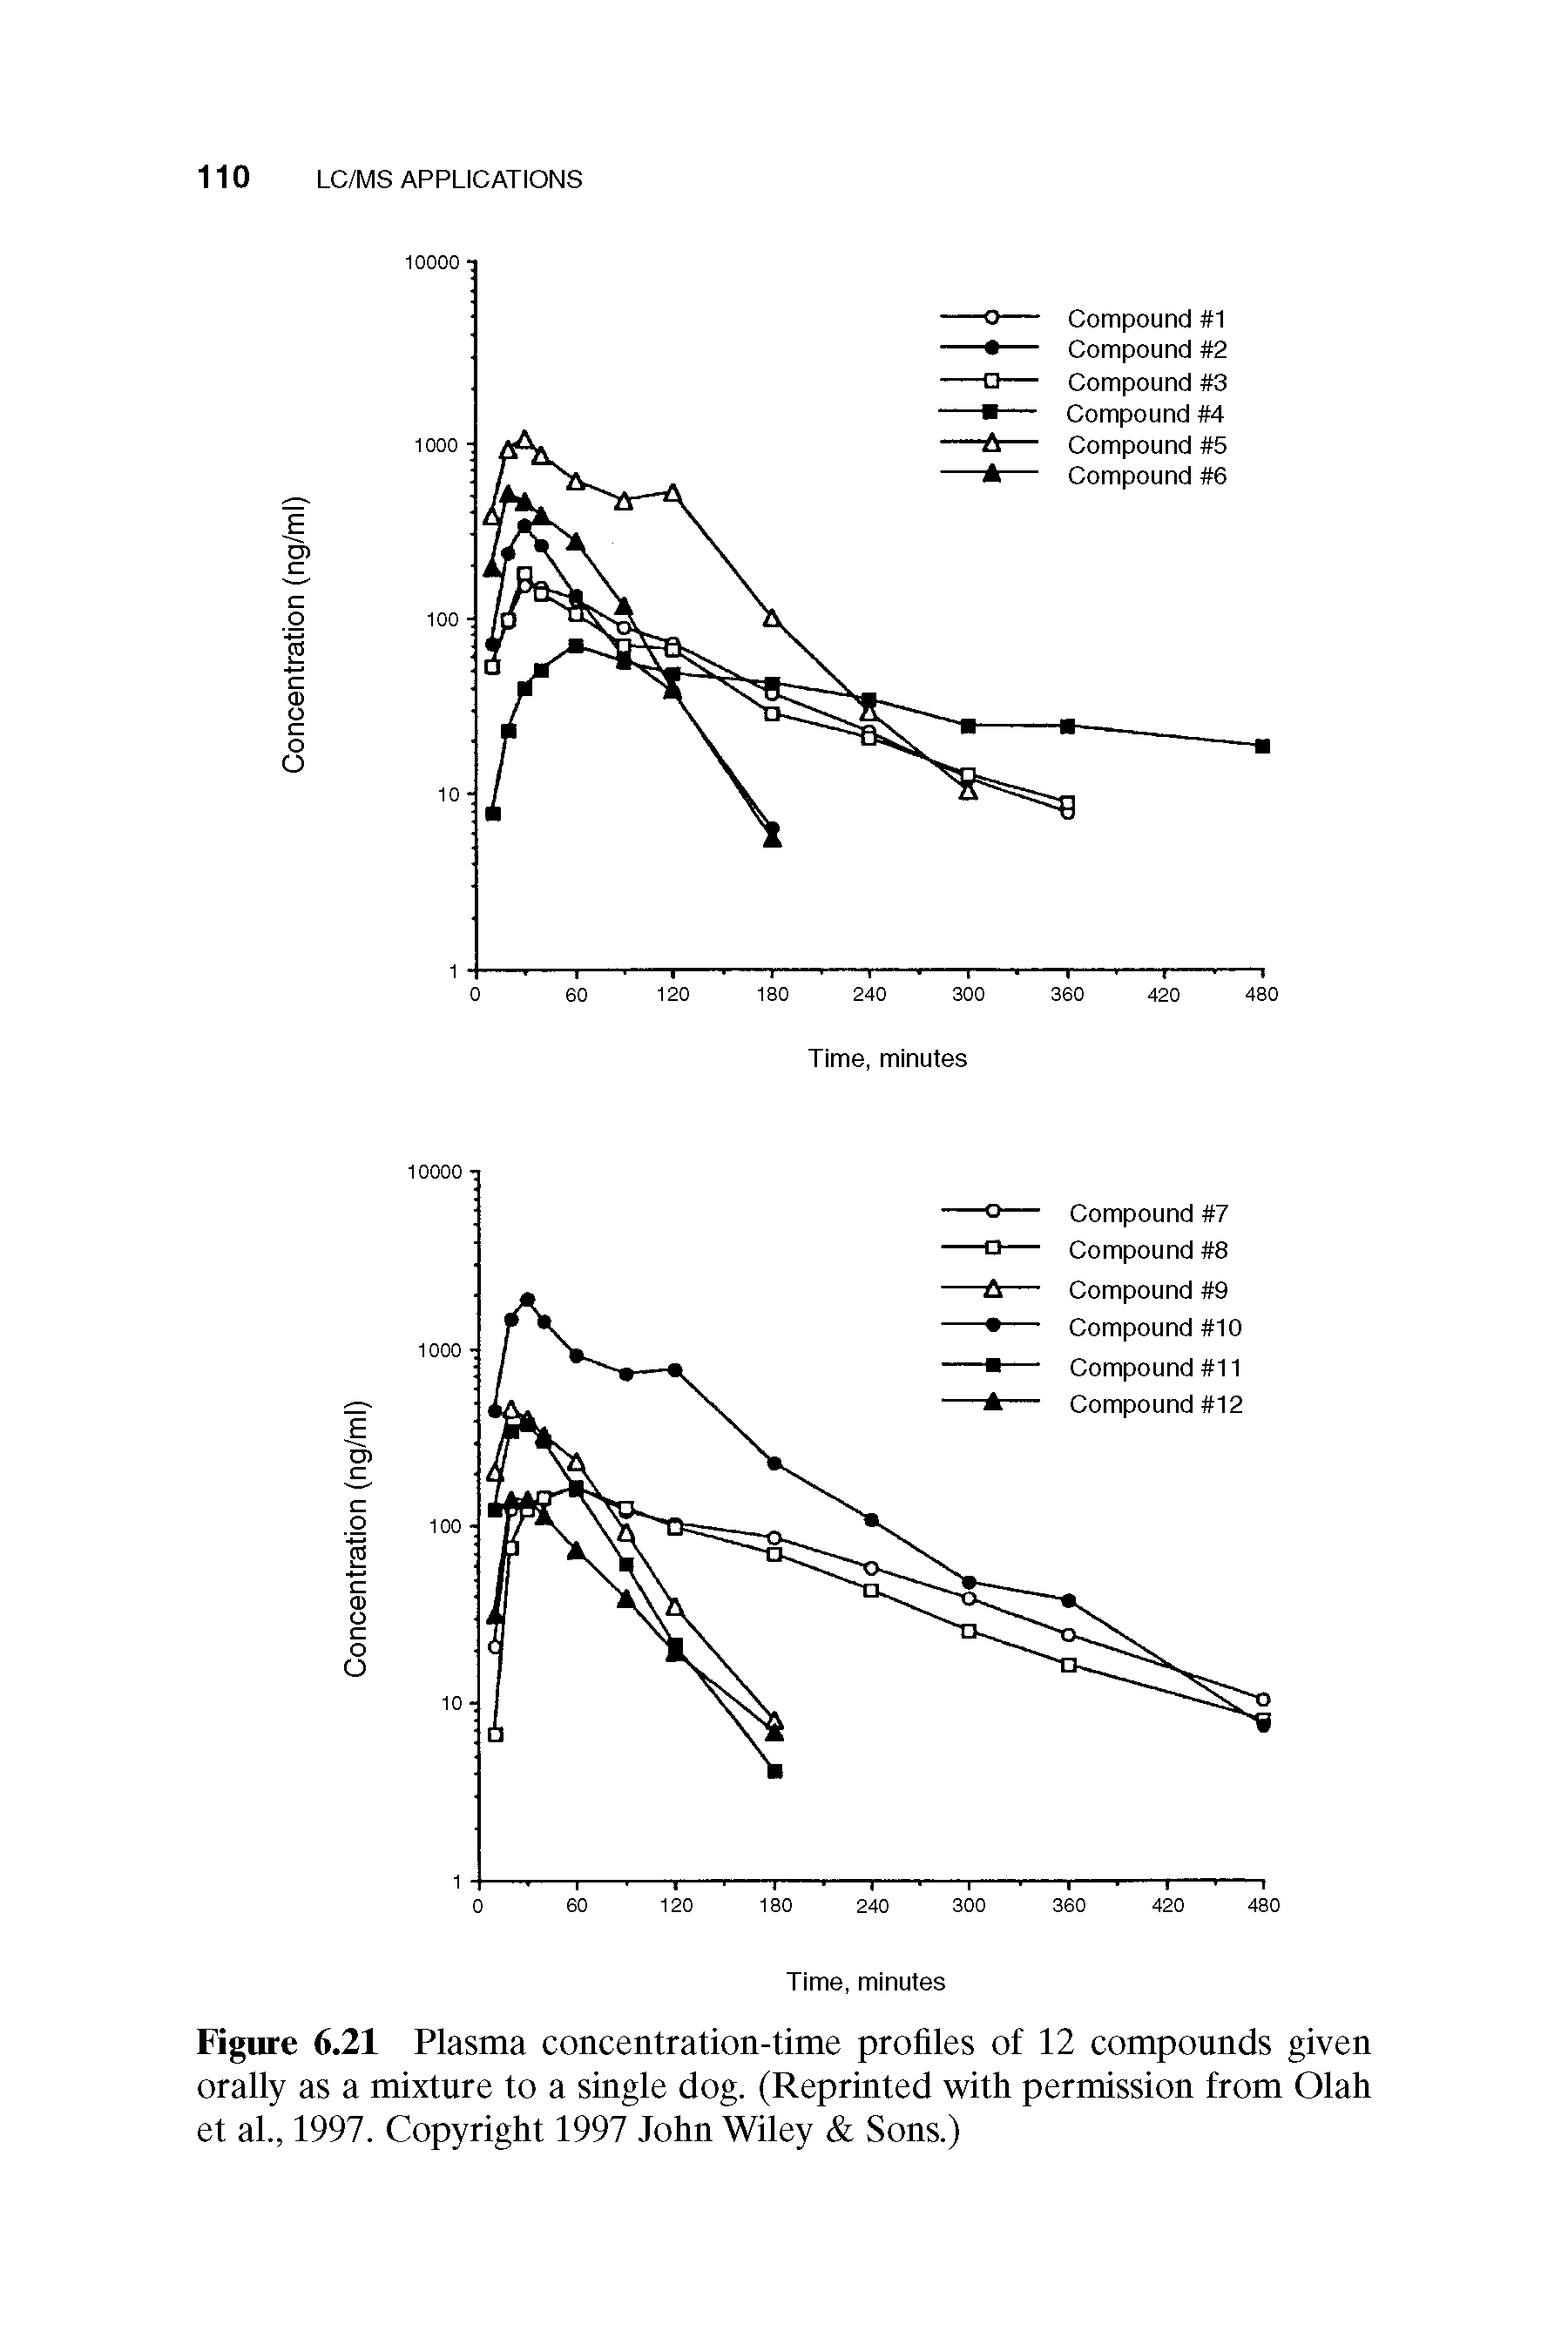 Figure 6.21 Plasma concentration-time profiles of 12 compounds given orally as a mixture to a single dog. (Reprinted with permission from Olah et al., 1997. Copyright 1997 John Wiley Sons.)...